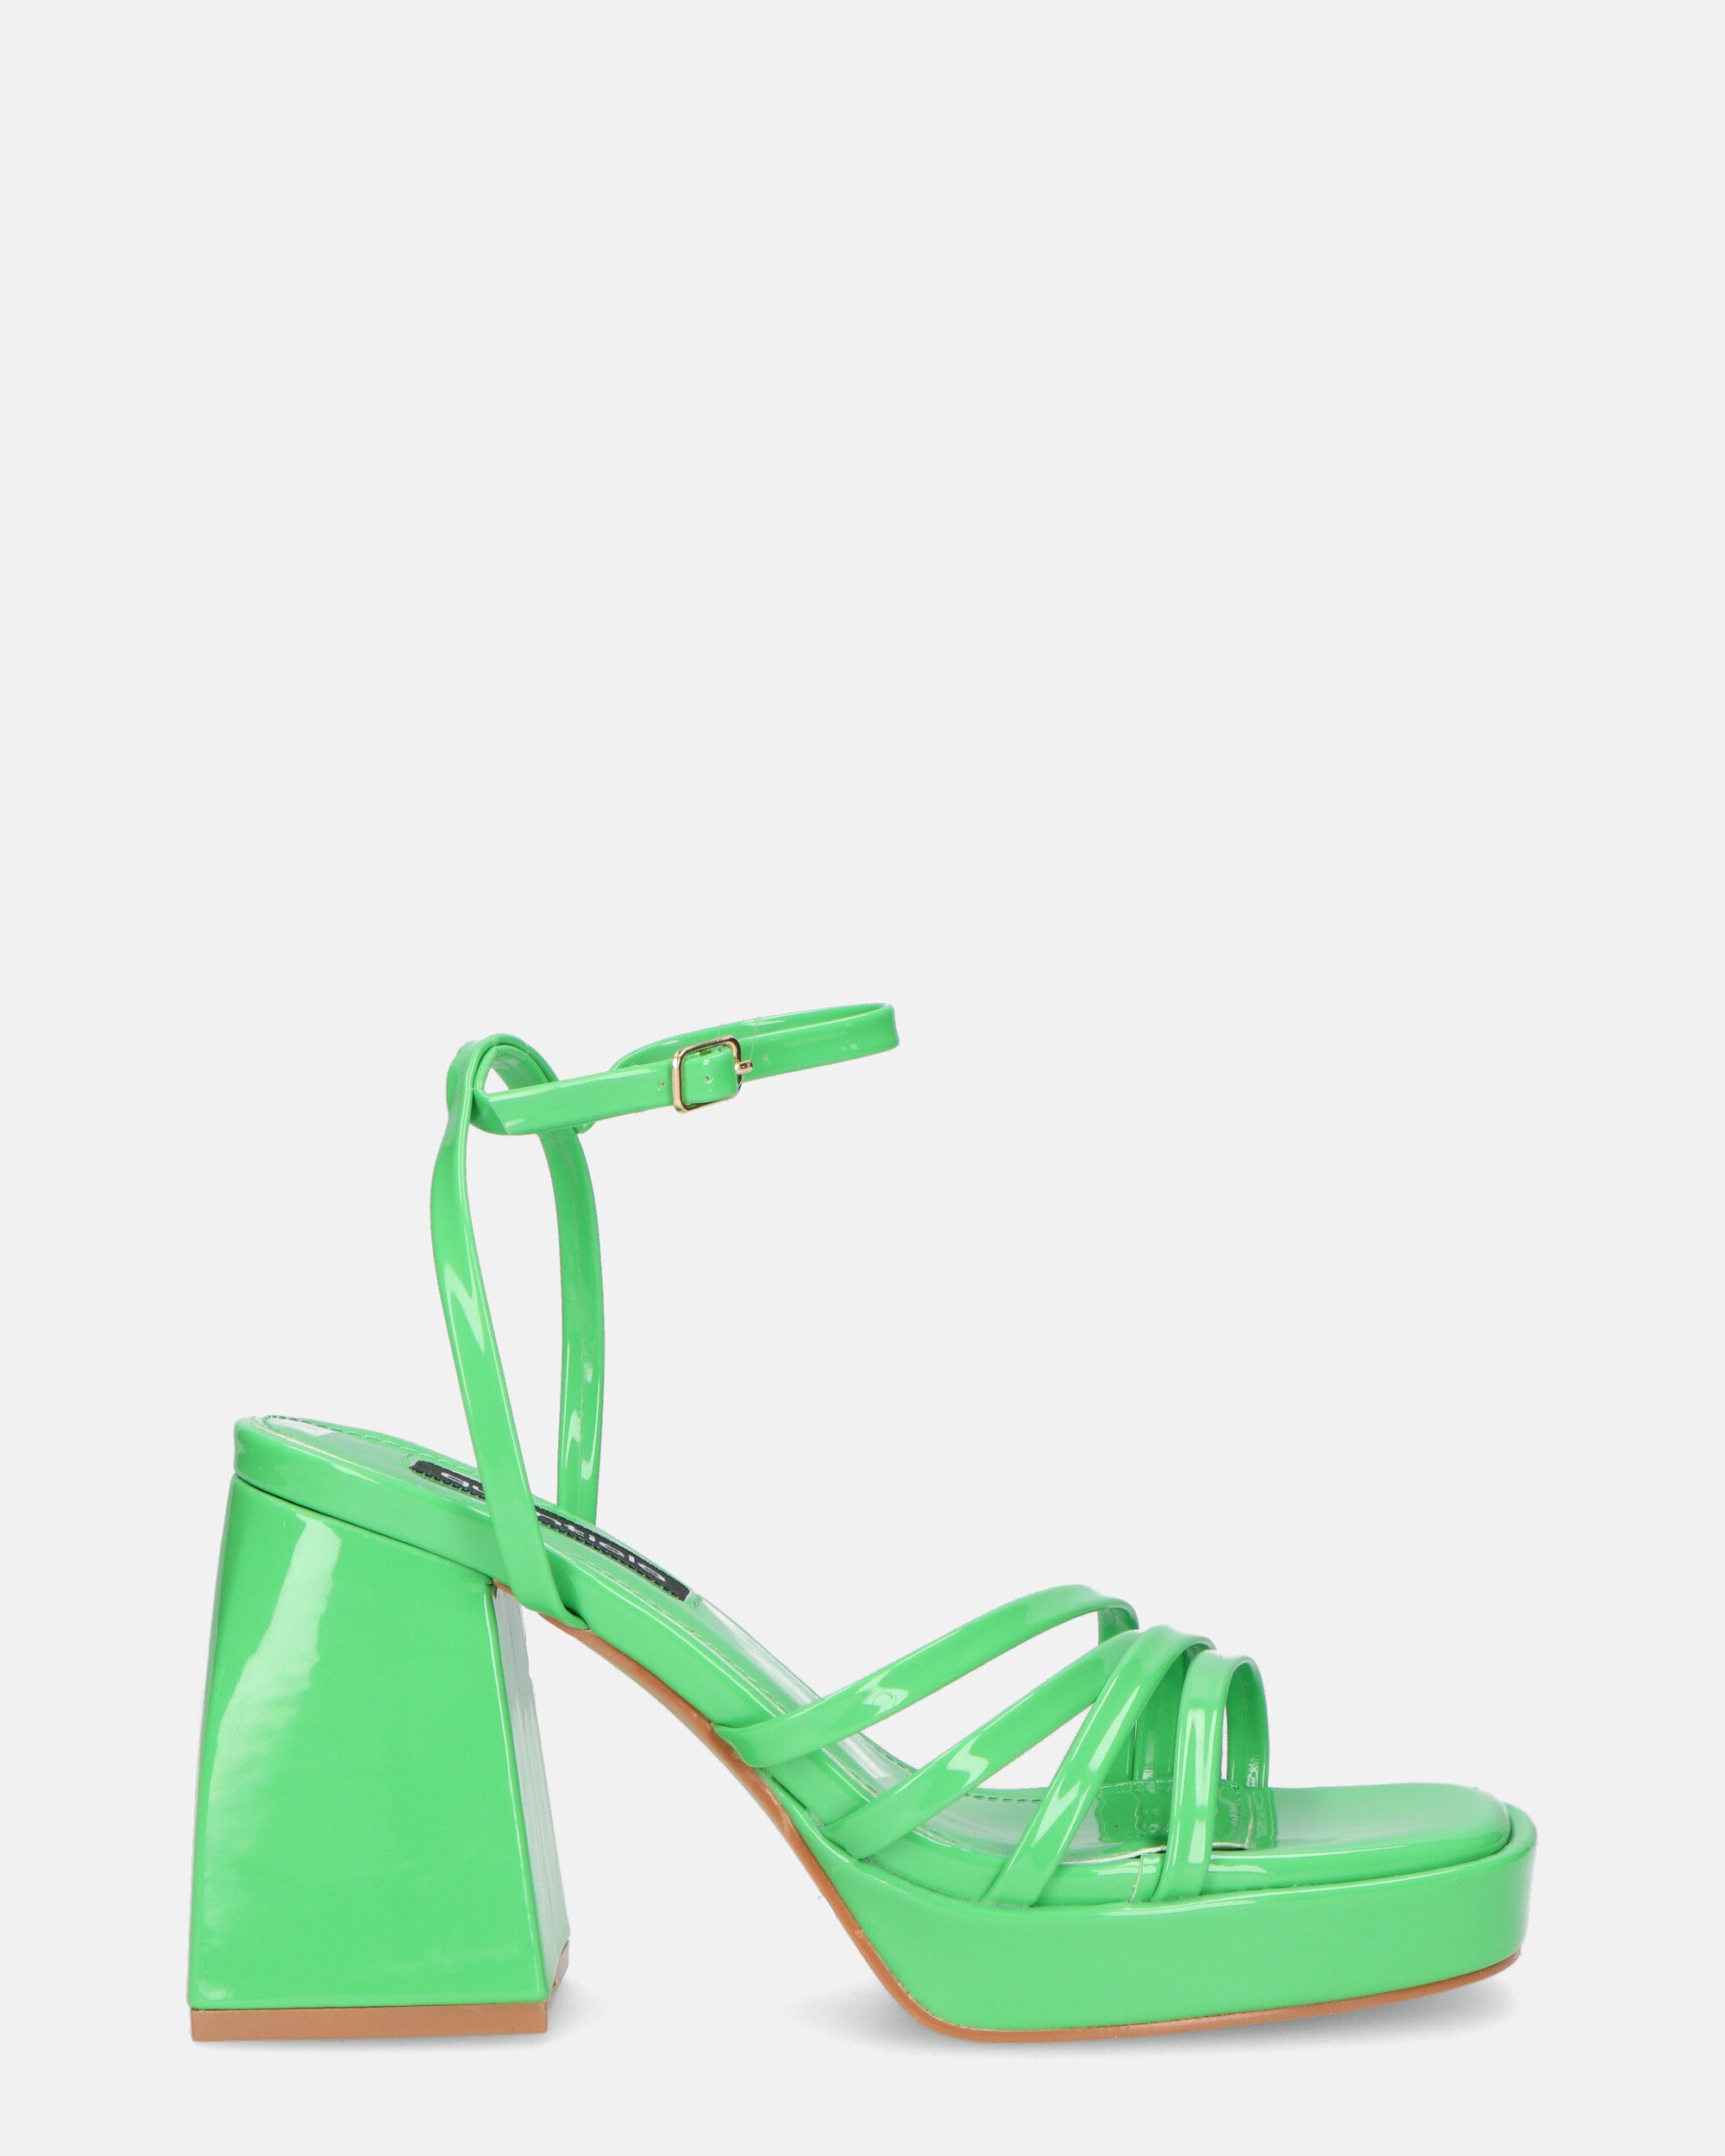 WINONA - green glassy sandals with squared heel